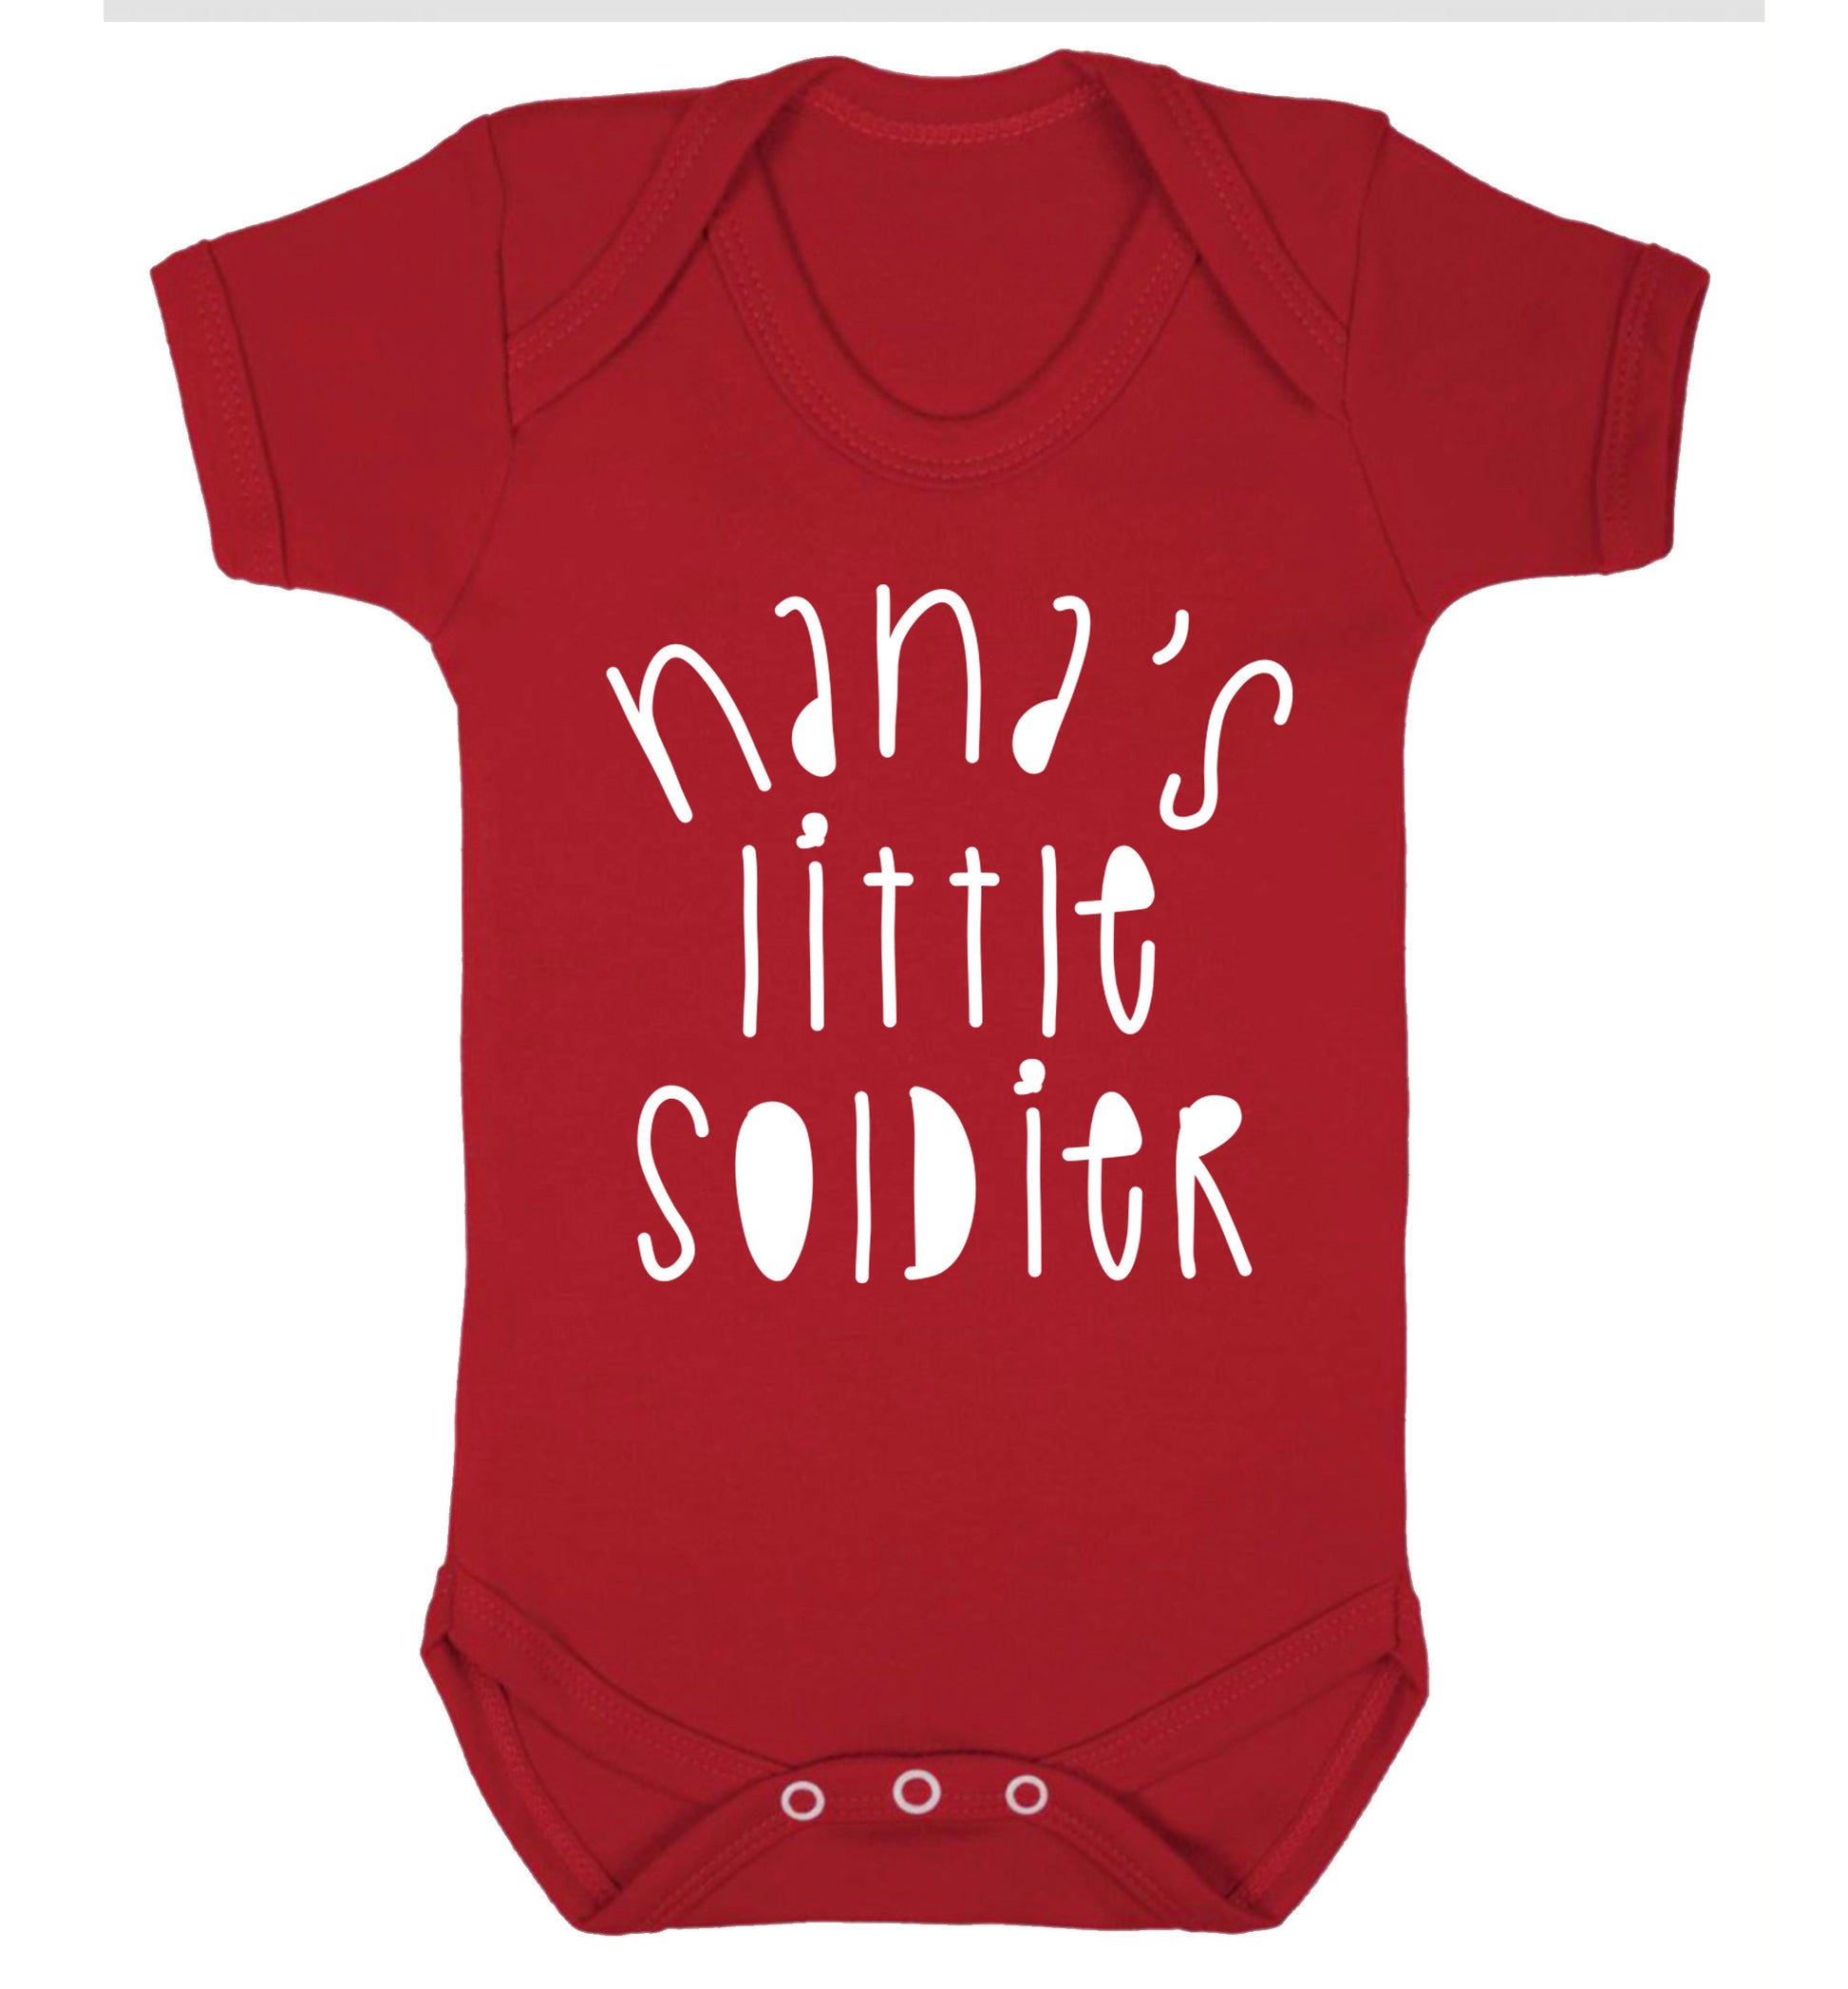 Nana's little soldier Baby Vest red 18-24 months